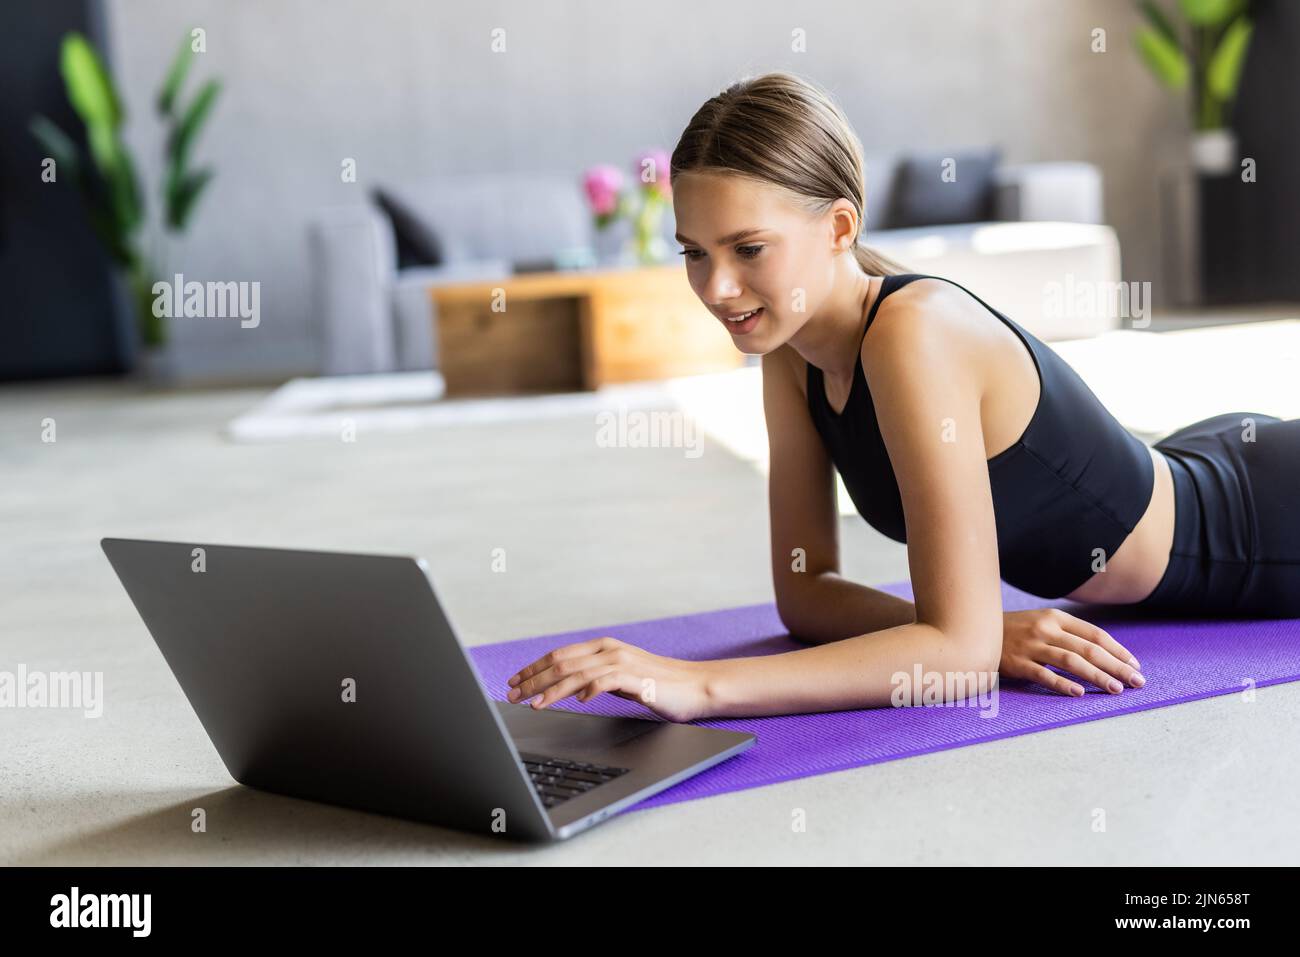 Training Concept. Smiling fit young woman in sports clothes watching fitness videos on internet using laptop near window, lying on floor yoga mat in t Stock Photo